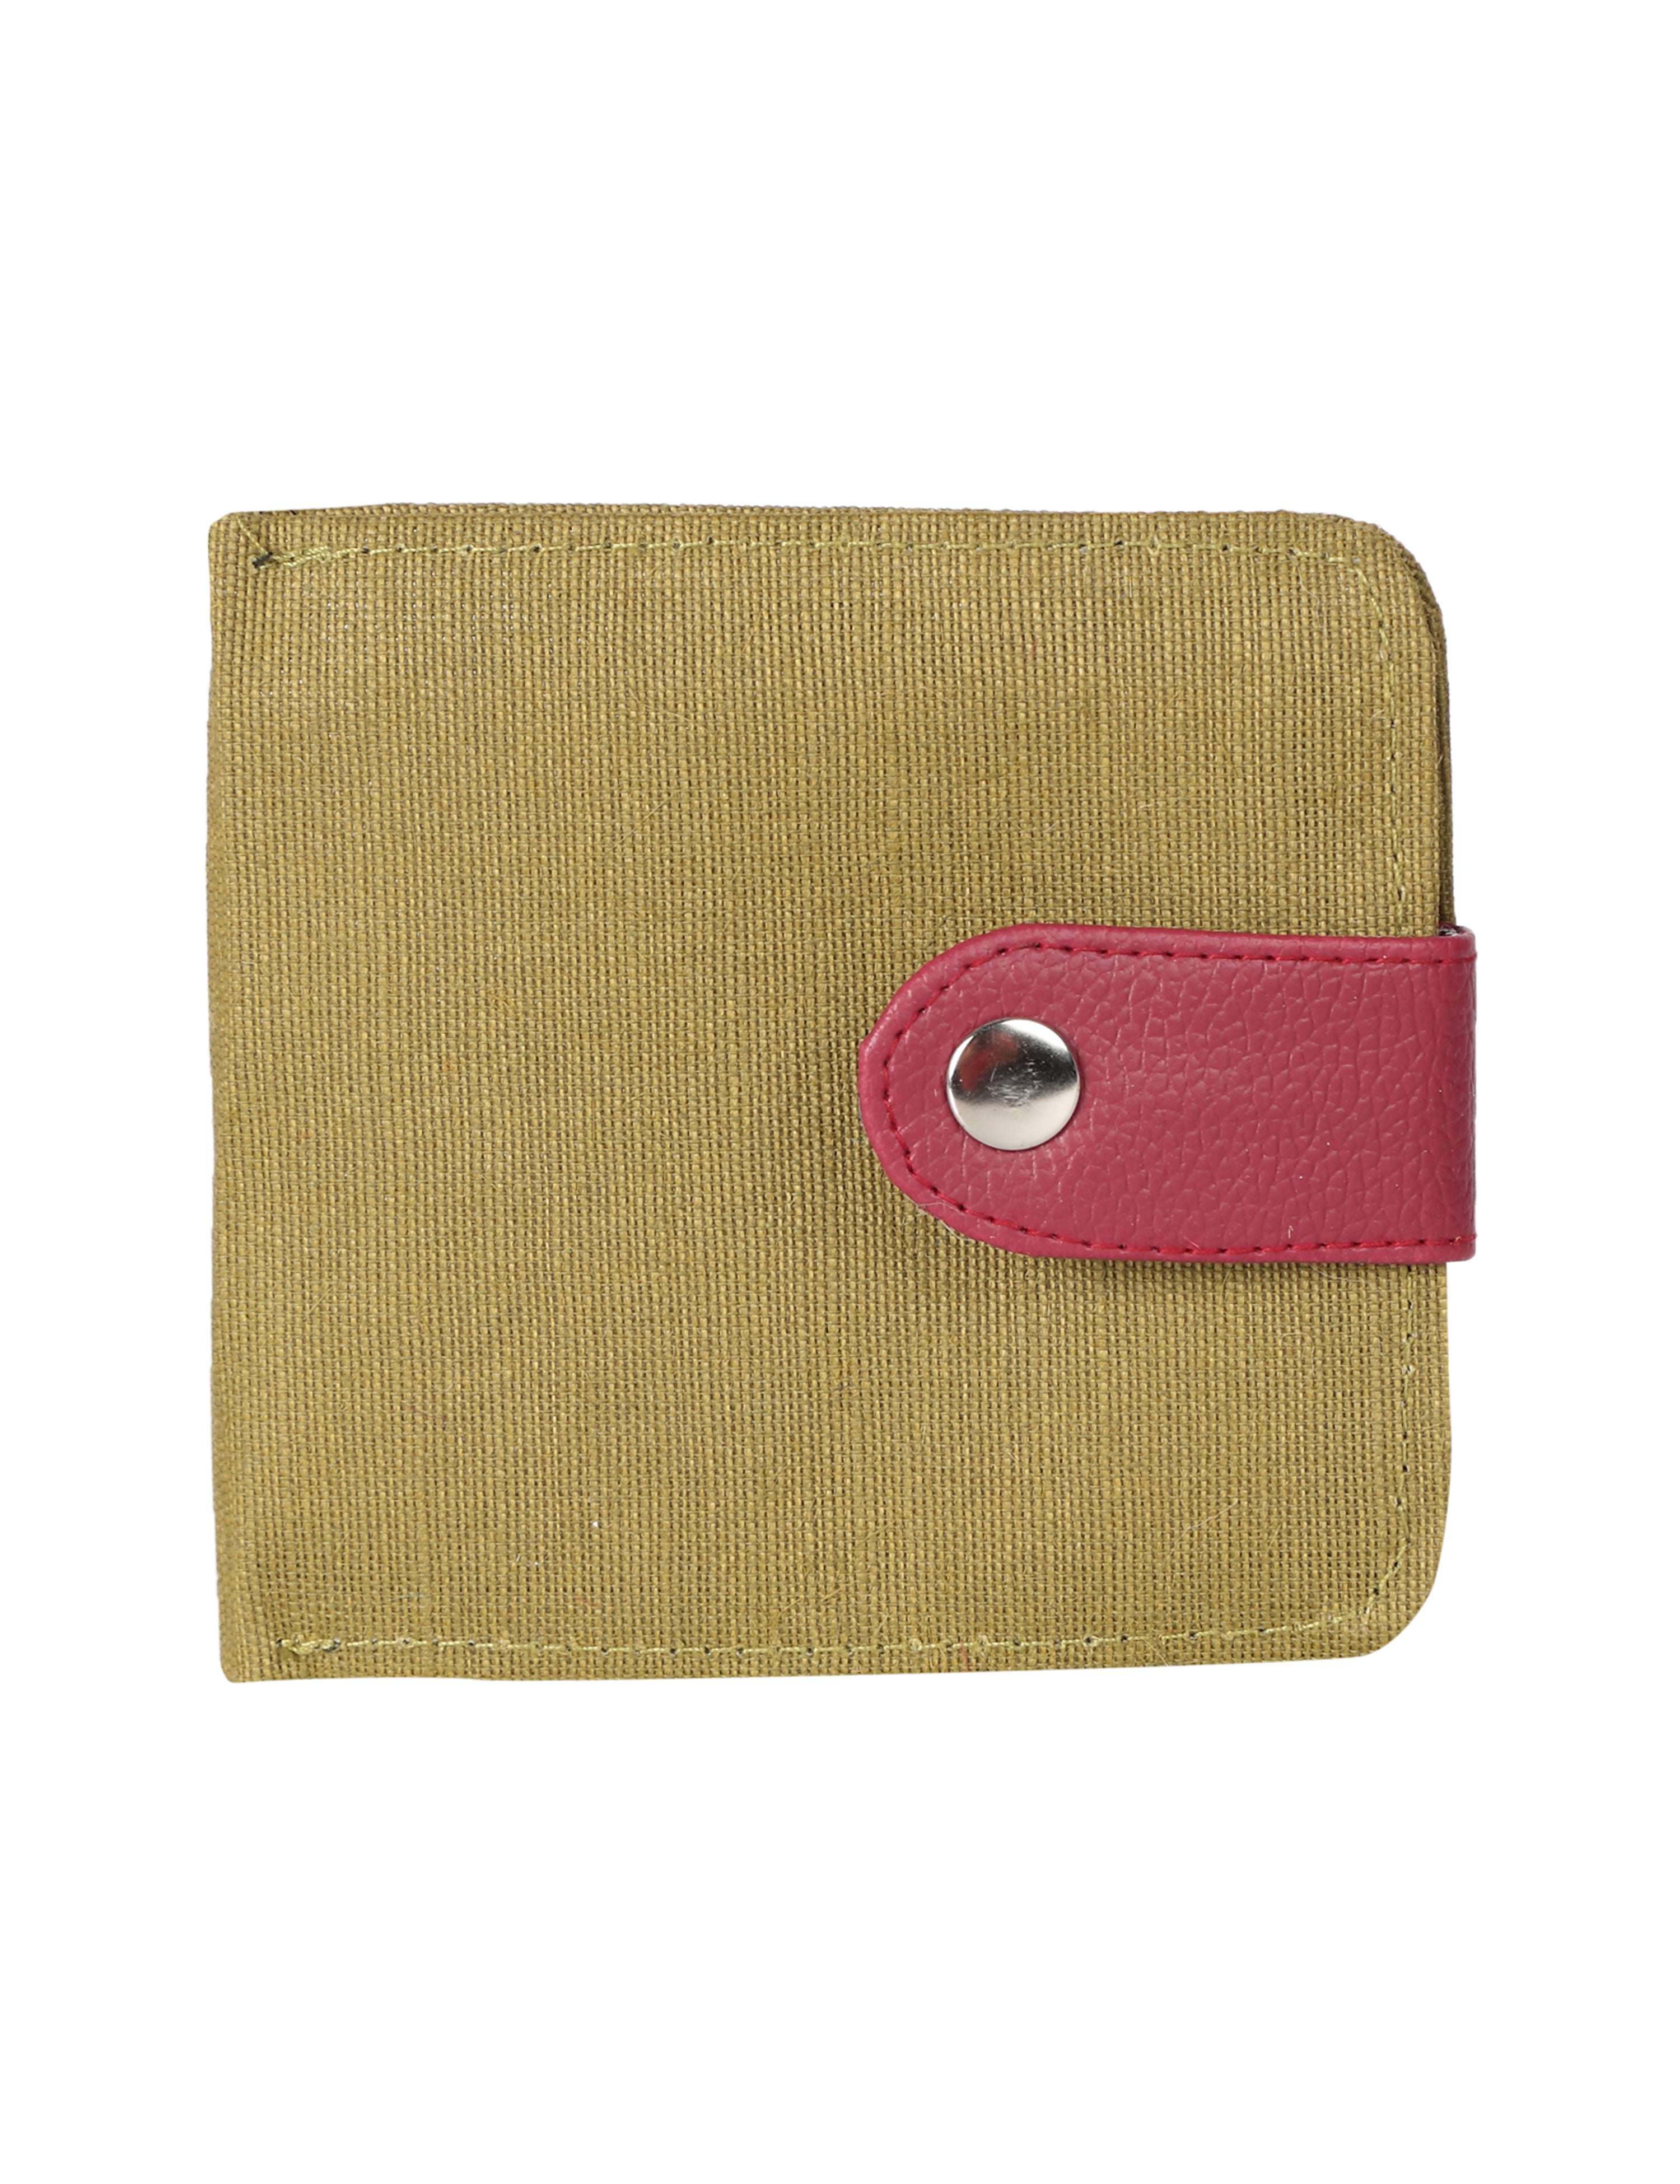 Amic Bag Jute Printed Handcrafted Chain Wallet ,Mini Wallet